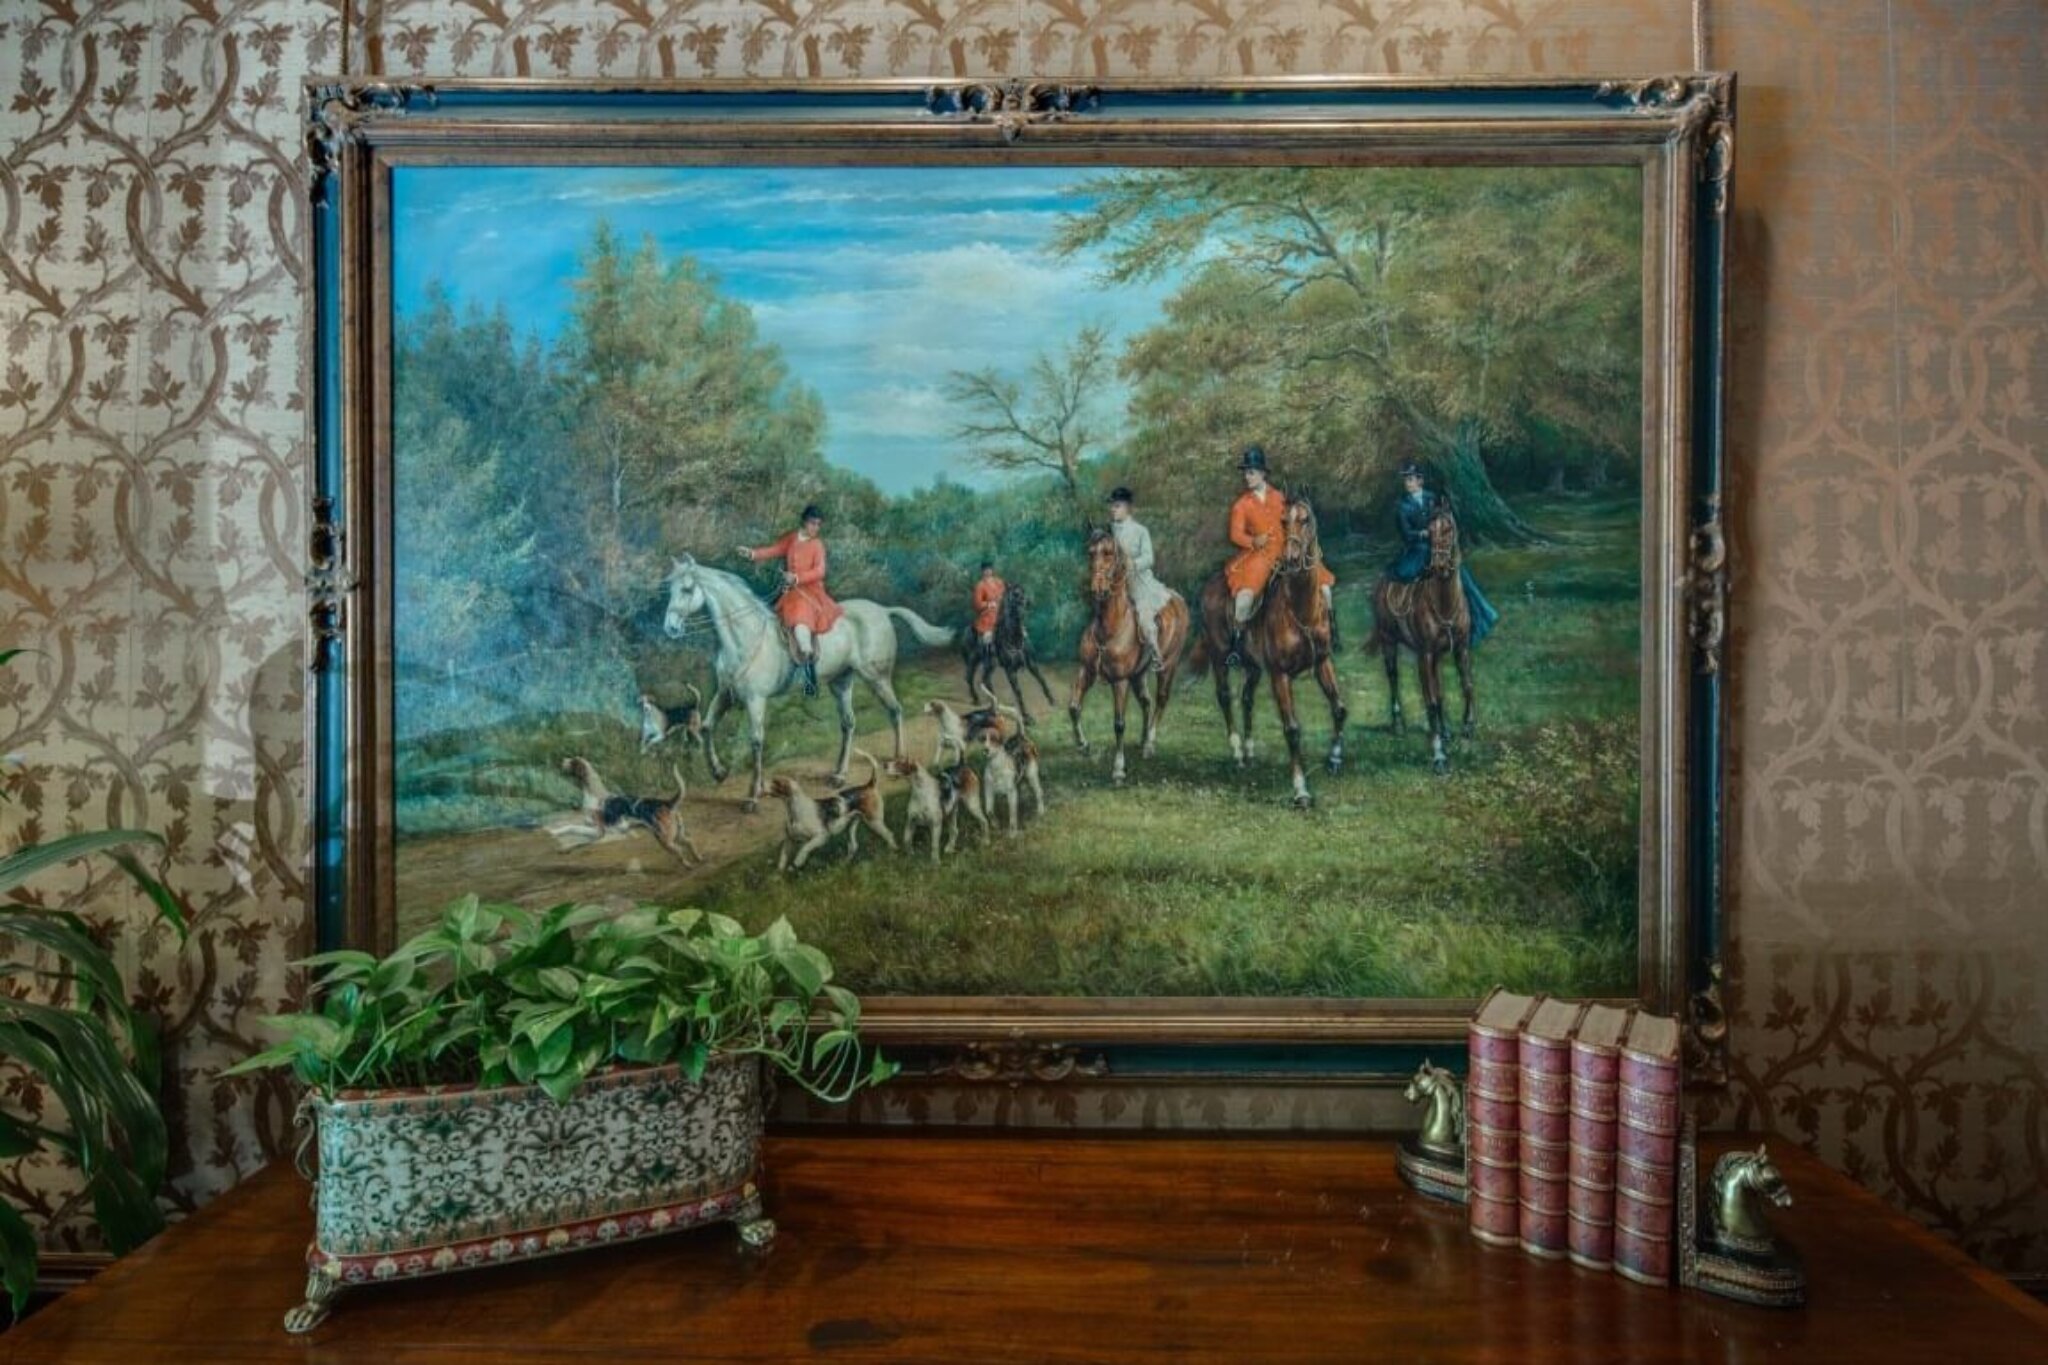 Painting of english husntmen on their horses at the entrance